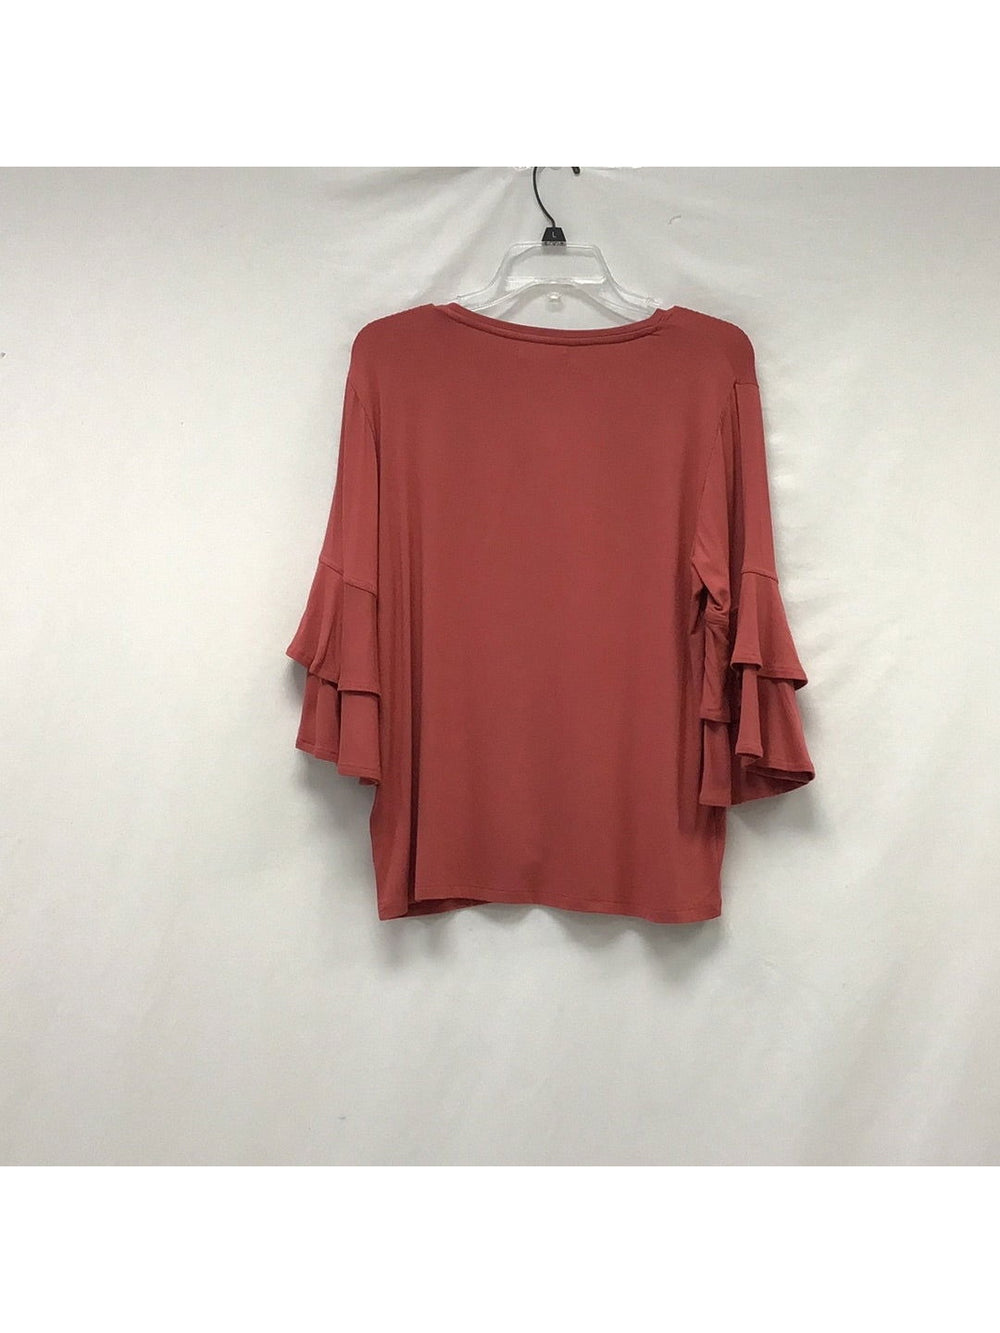 FRYE Women Red Long Sleeve Shirt Size Small - The Kennedy Collective Thrift - 